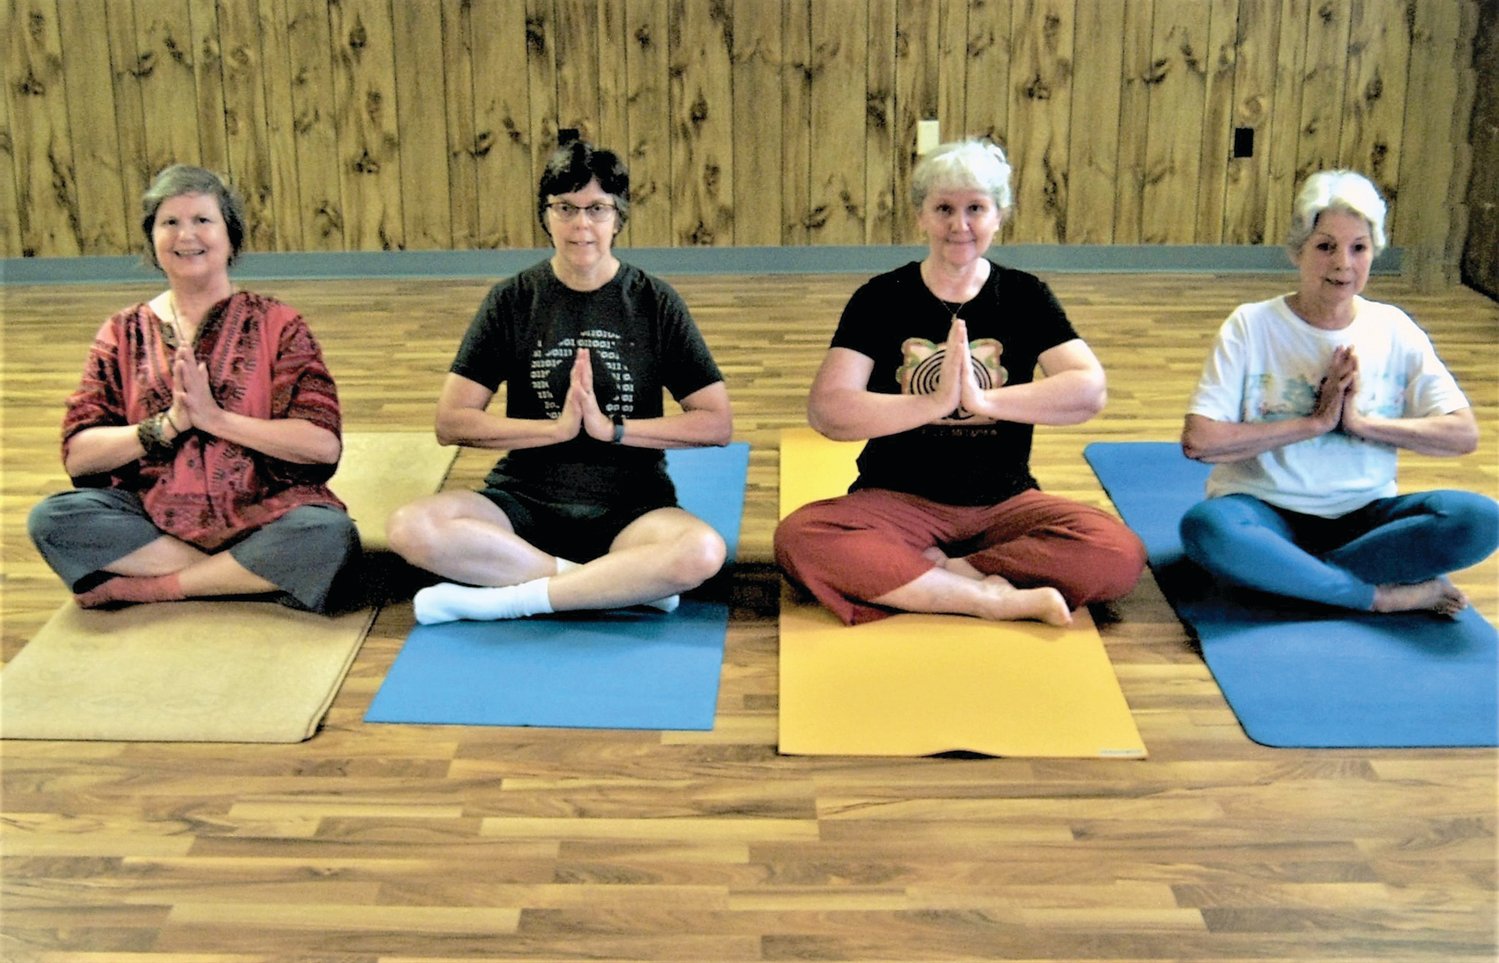 Irene Renauld, Irma Schmidt Davis, Audrey Martens Conner, Tanja Tagtmeyer, with hands in Anjali Mudra (also known as Prayer Mudra), and legs in Sukhasana (aka Easy Pose).